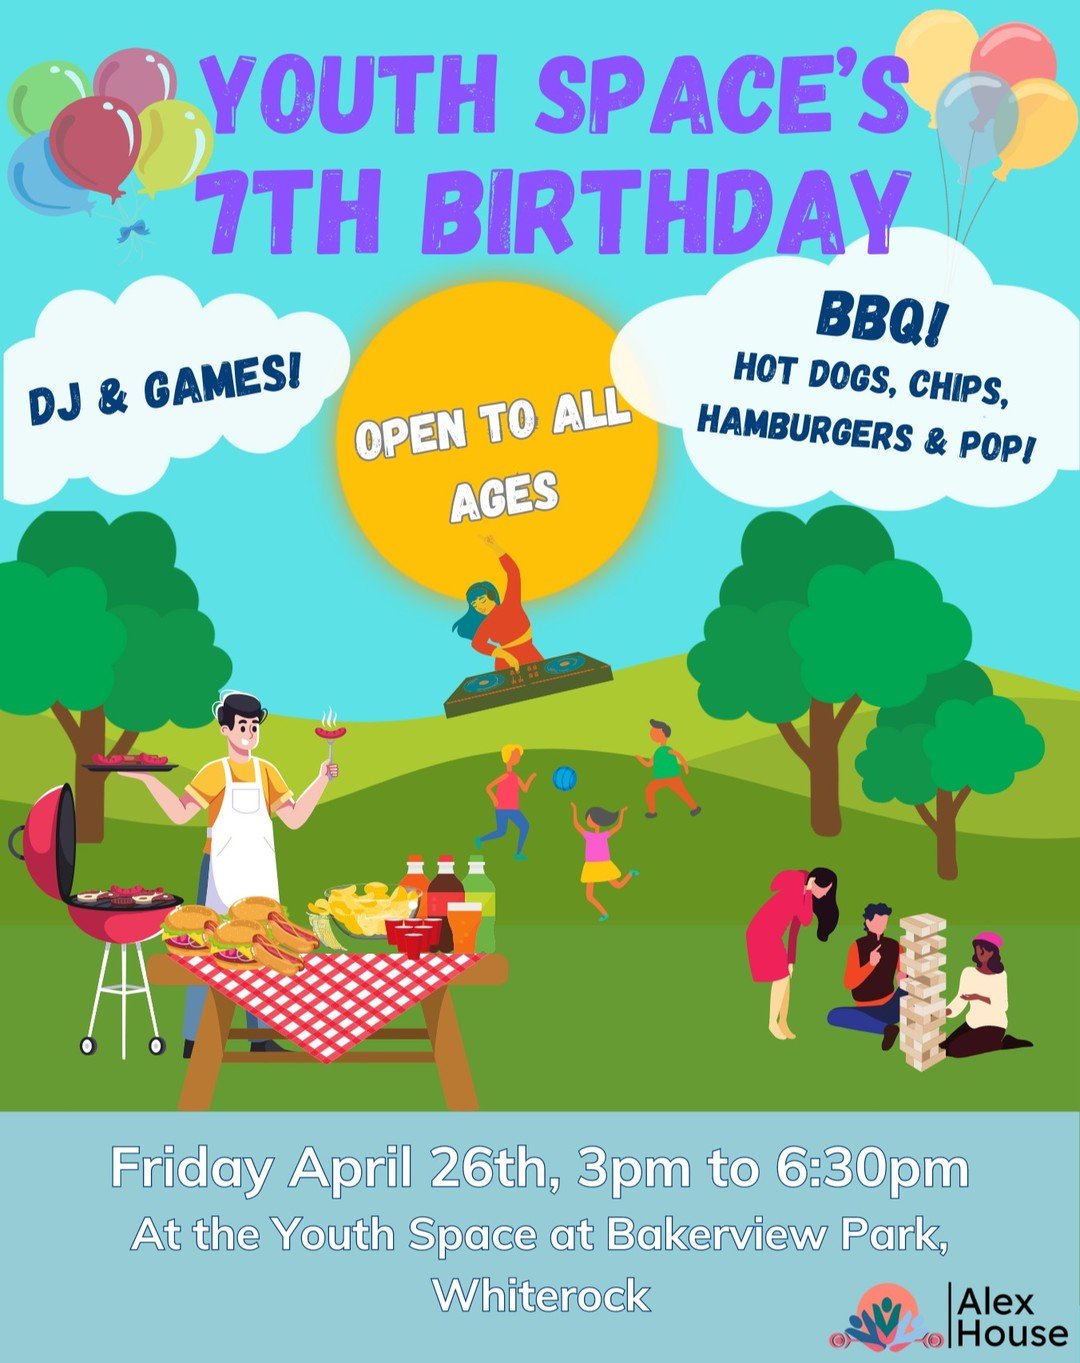 The Youth Space is turning 7 years old!! And to celebrate we will be opening up the session on Friday April 26th for youth 10-18 years old.

There will be a BBQ, games and DJ Chloe will be in attendance to entertain us all. 

COME DOWN AND CELEBRATE 